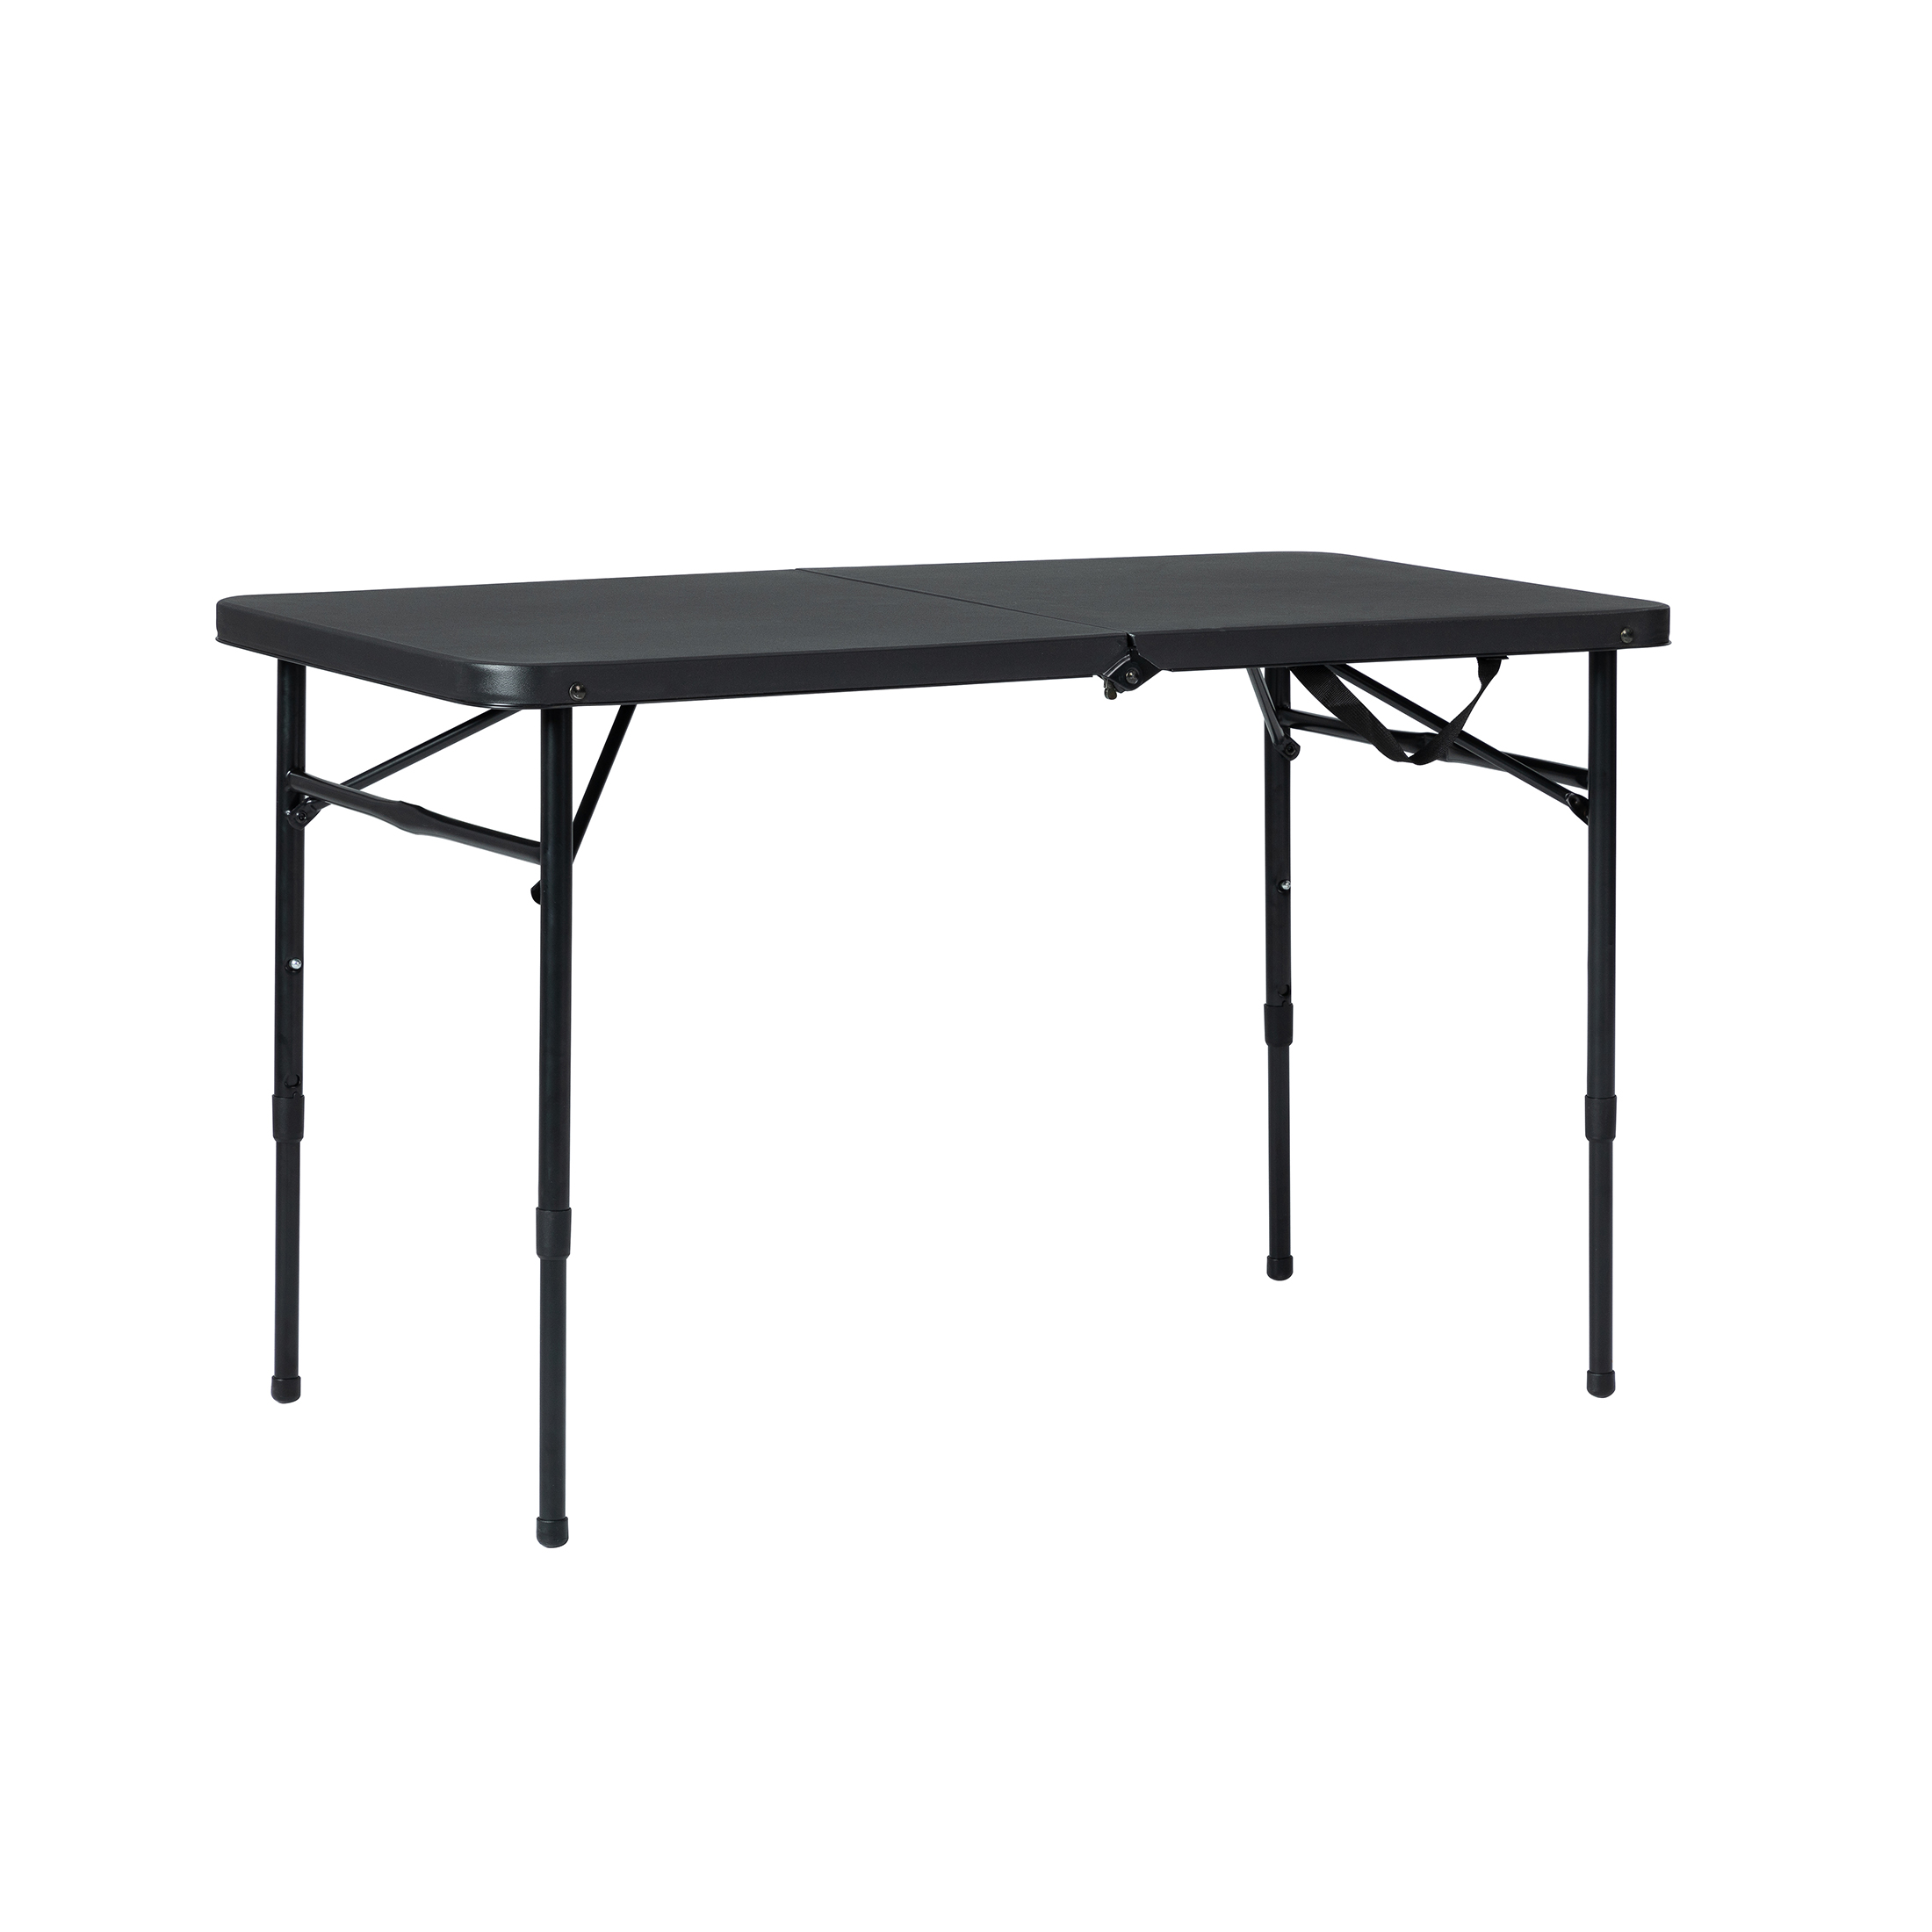 Mainstays 40"L x 20"W Plastic Adjustable Height Fold-in-Half Folding Table, Rich Black - image 1 of 11